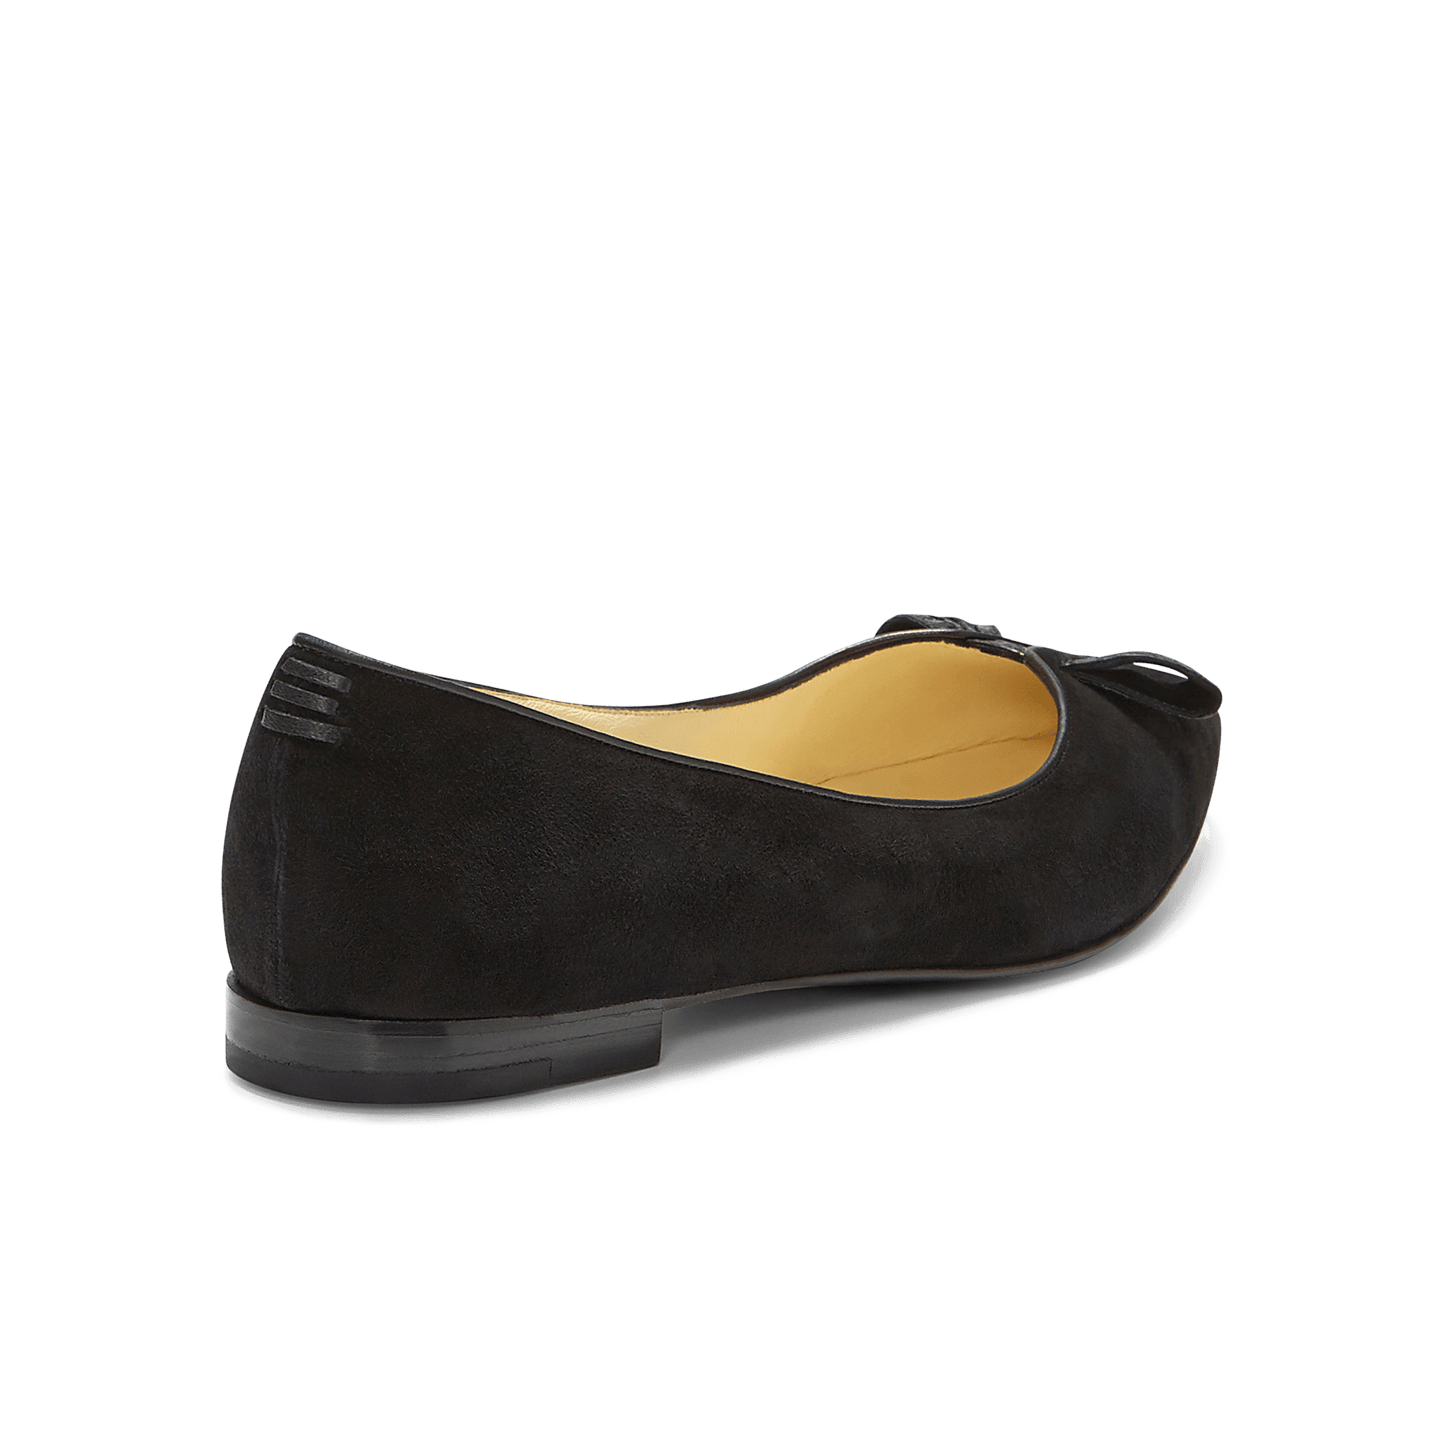 10mm Italian Made Pointed Toe Lana Flat in Black Suede